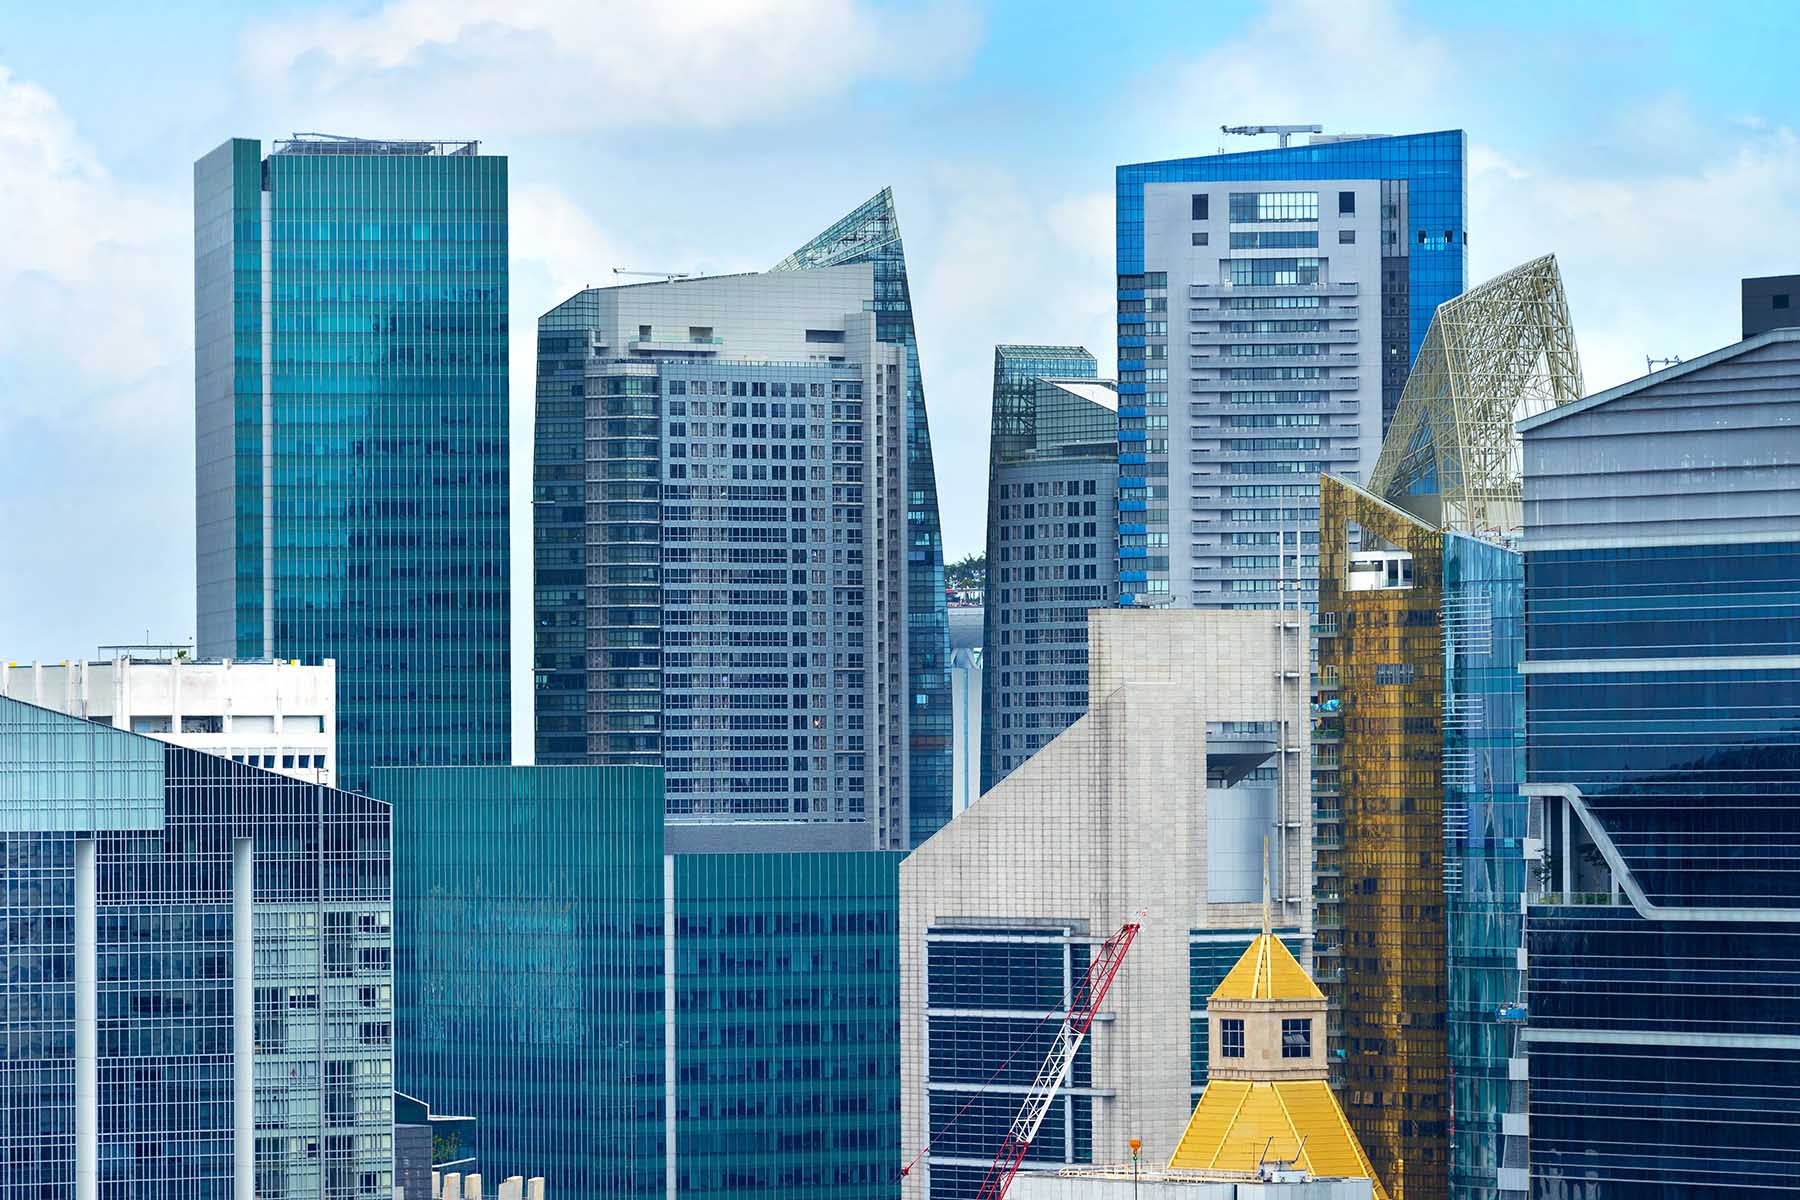 Modern-looking skyscrapers in Downtown Singapore. There is a yellow building in the front, which pops against the blue rest of the image.